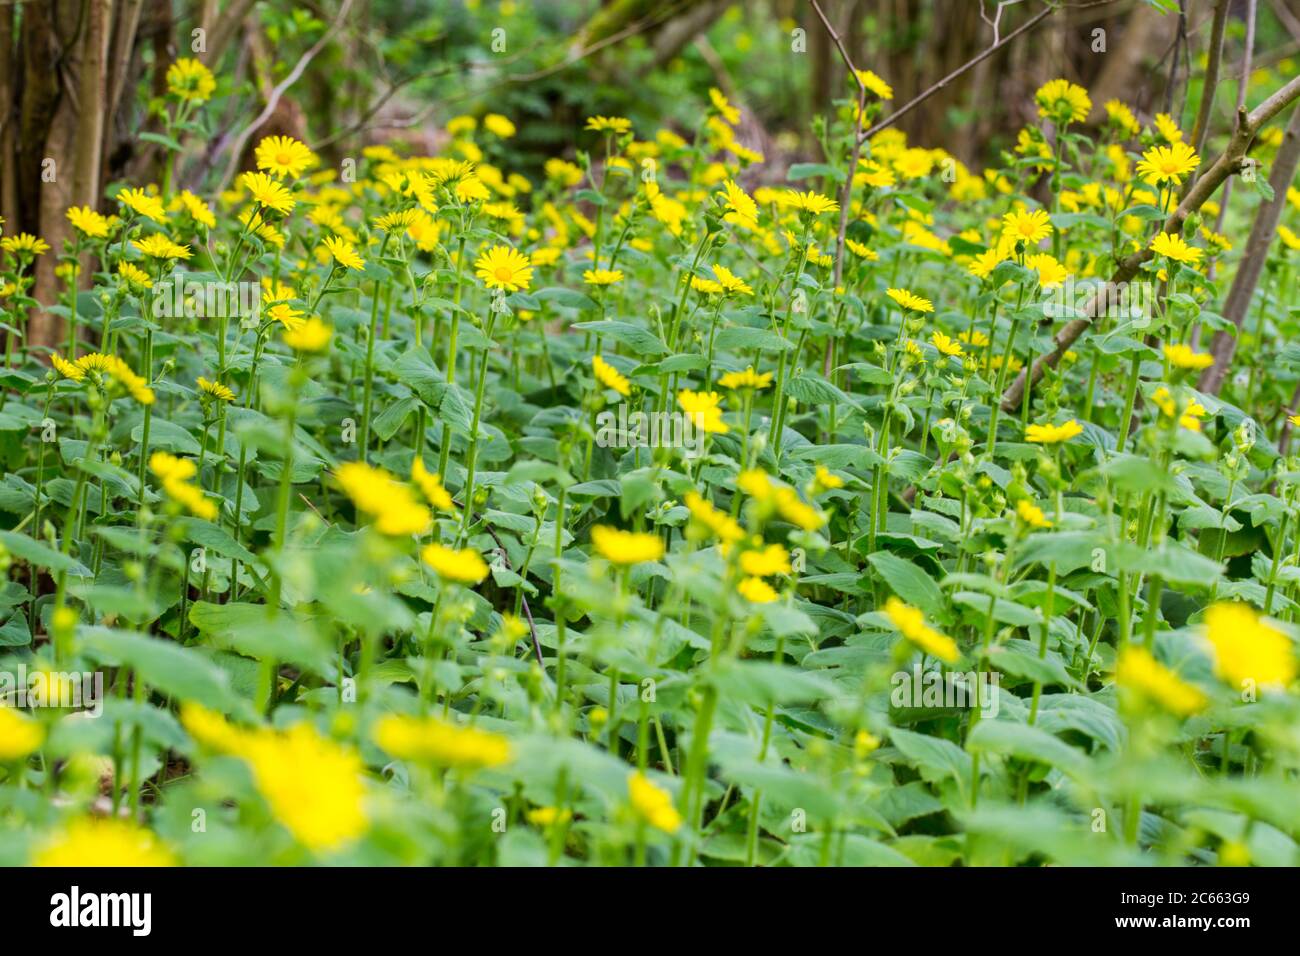 Plantain-leaved Leopard's-bane Stock Photo